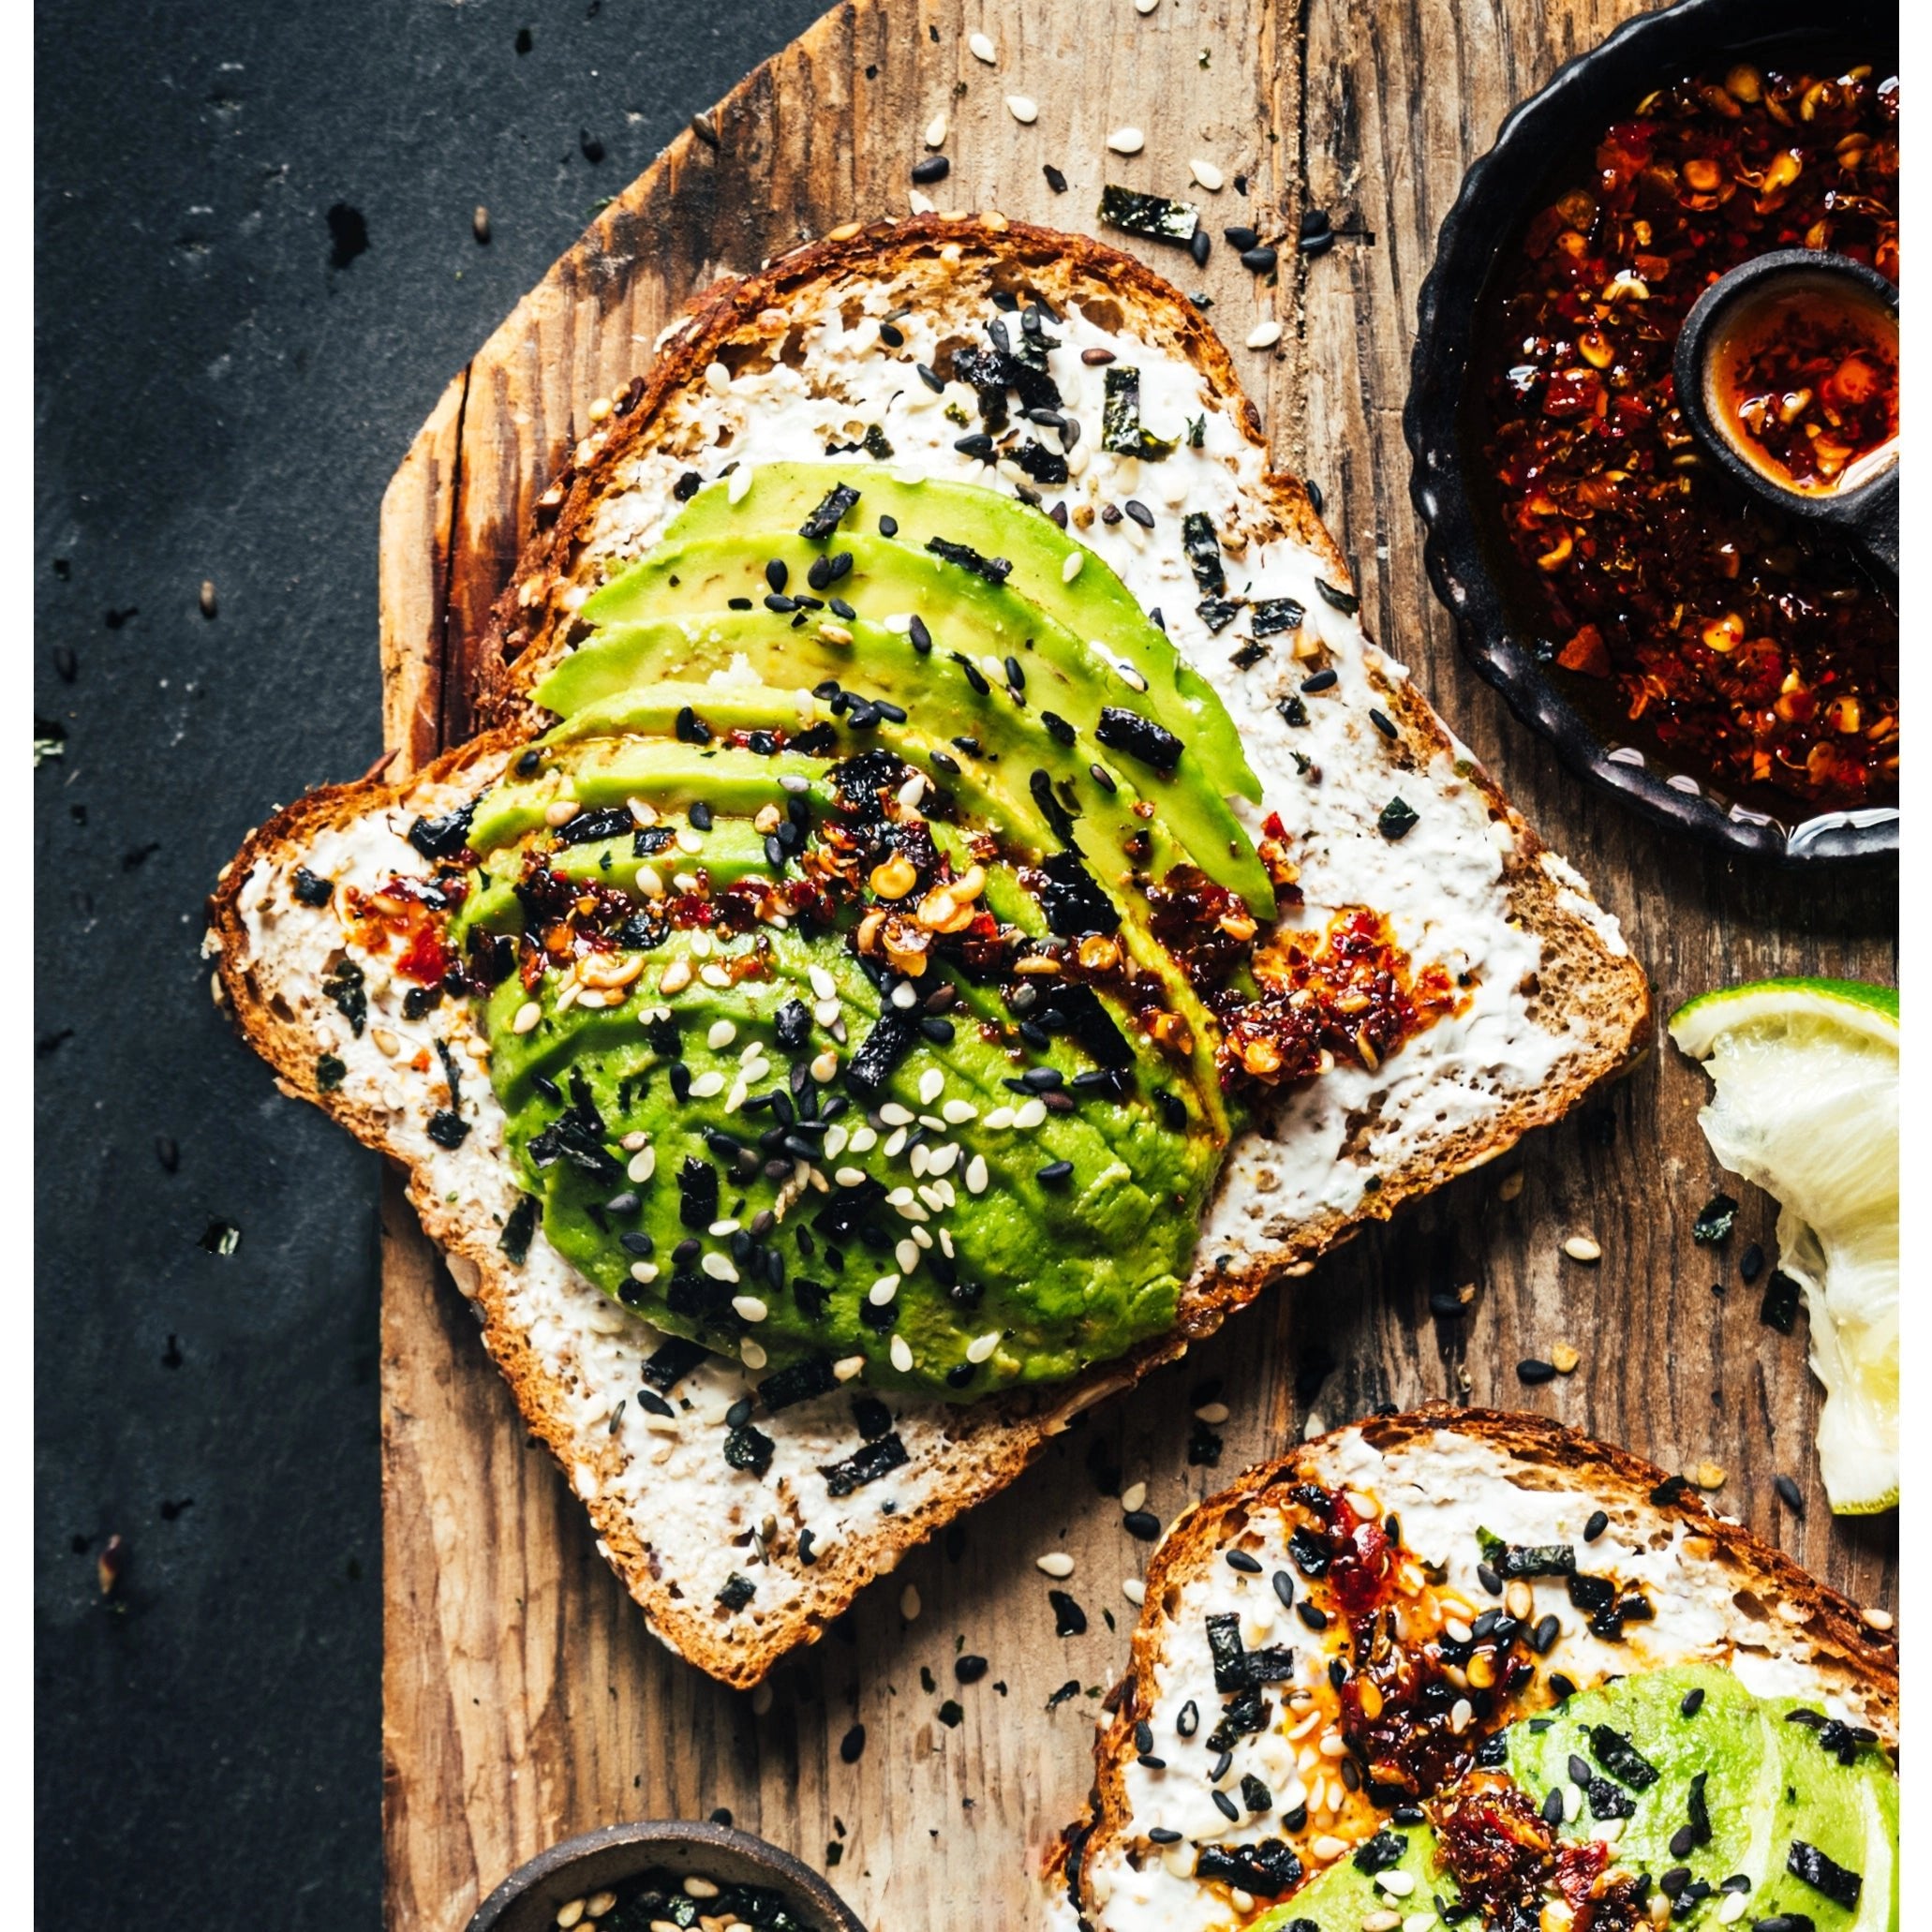 Avocado Toast topped with Blank Slate Sichuan Chili Oil. 